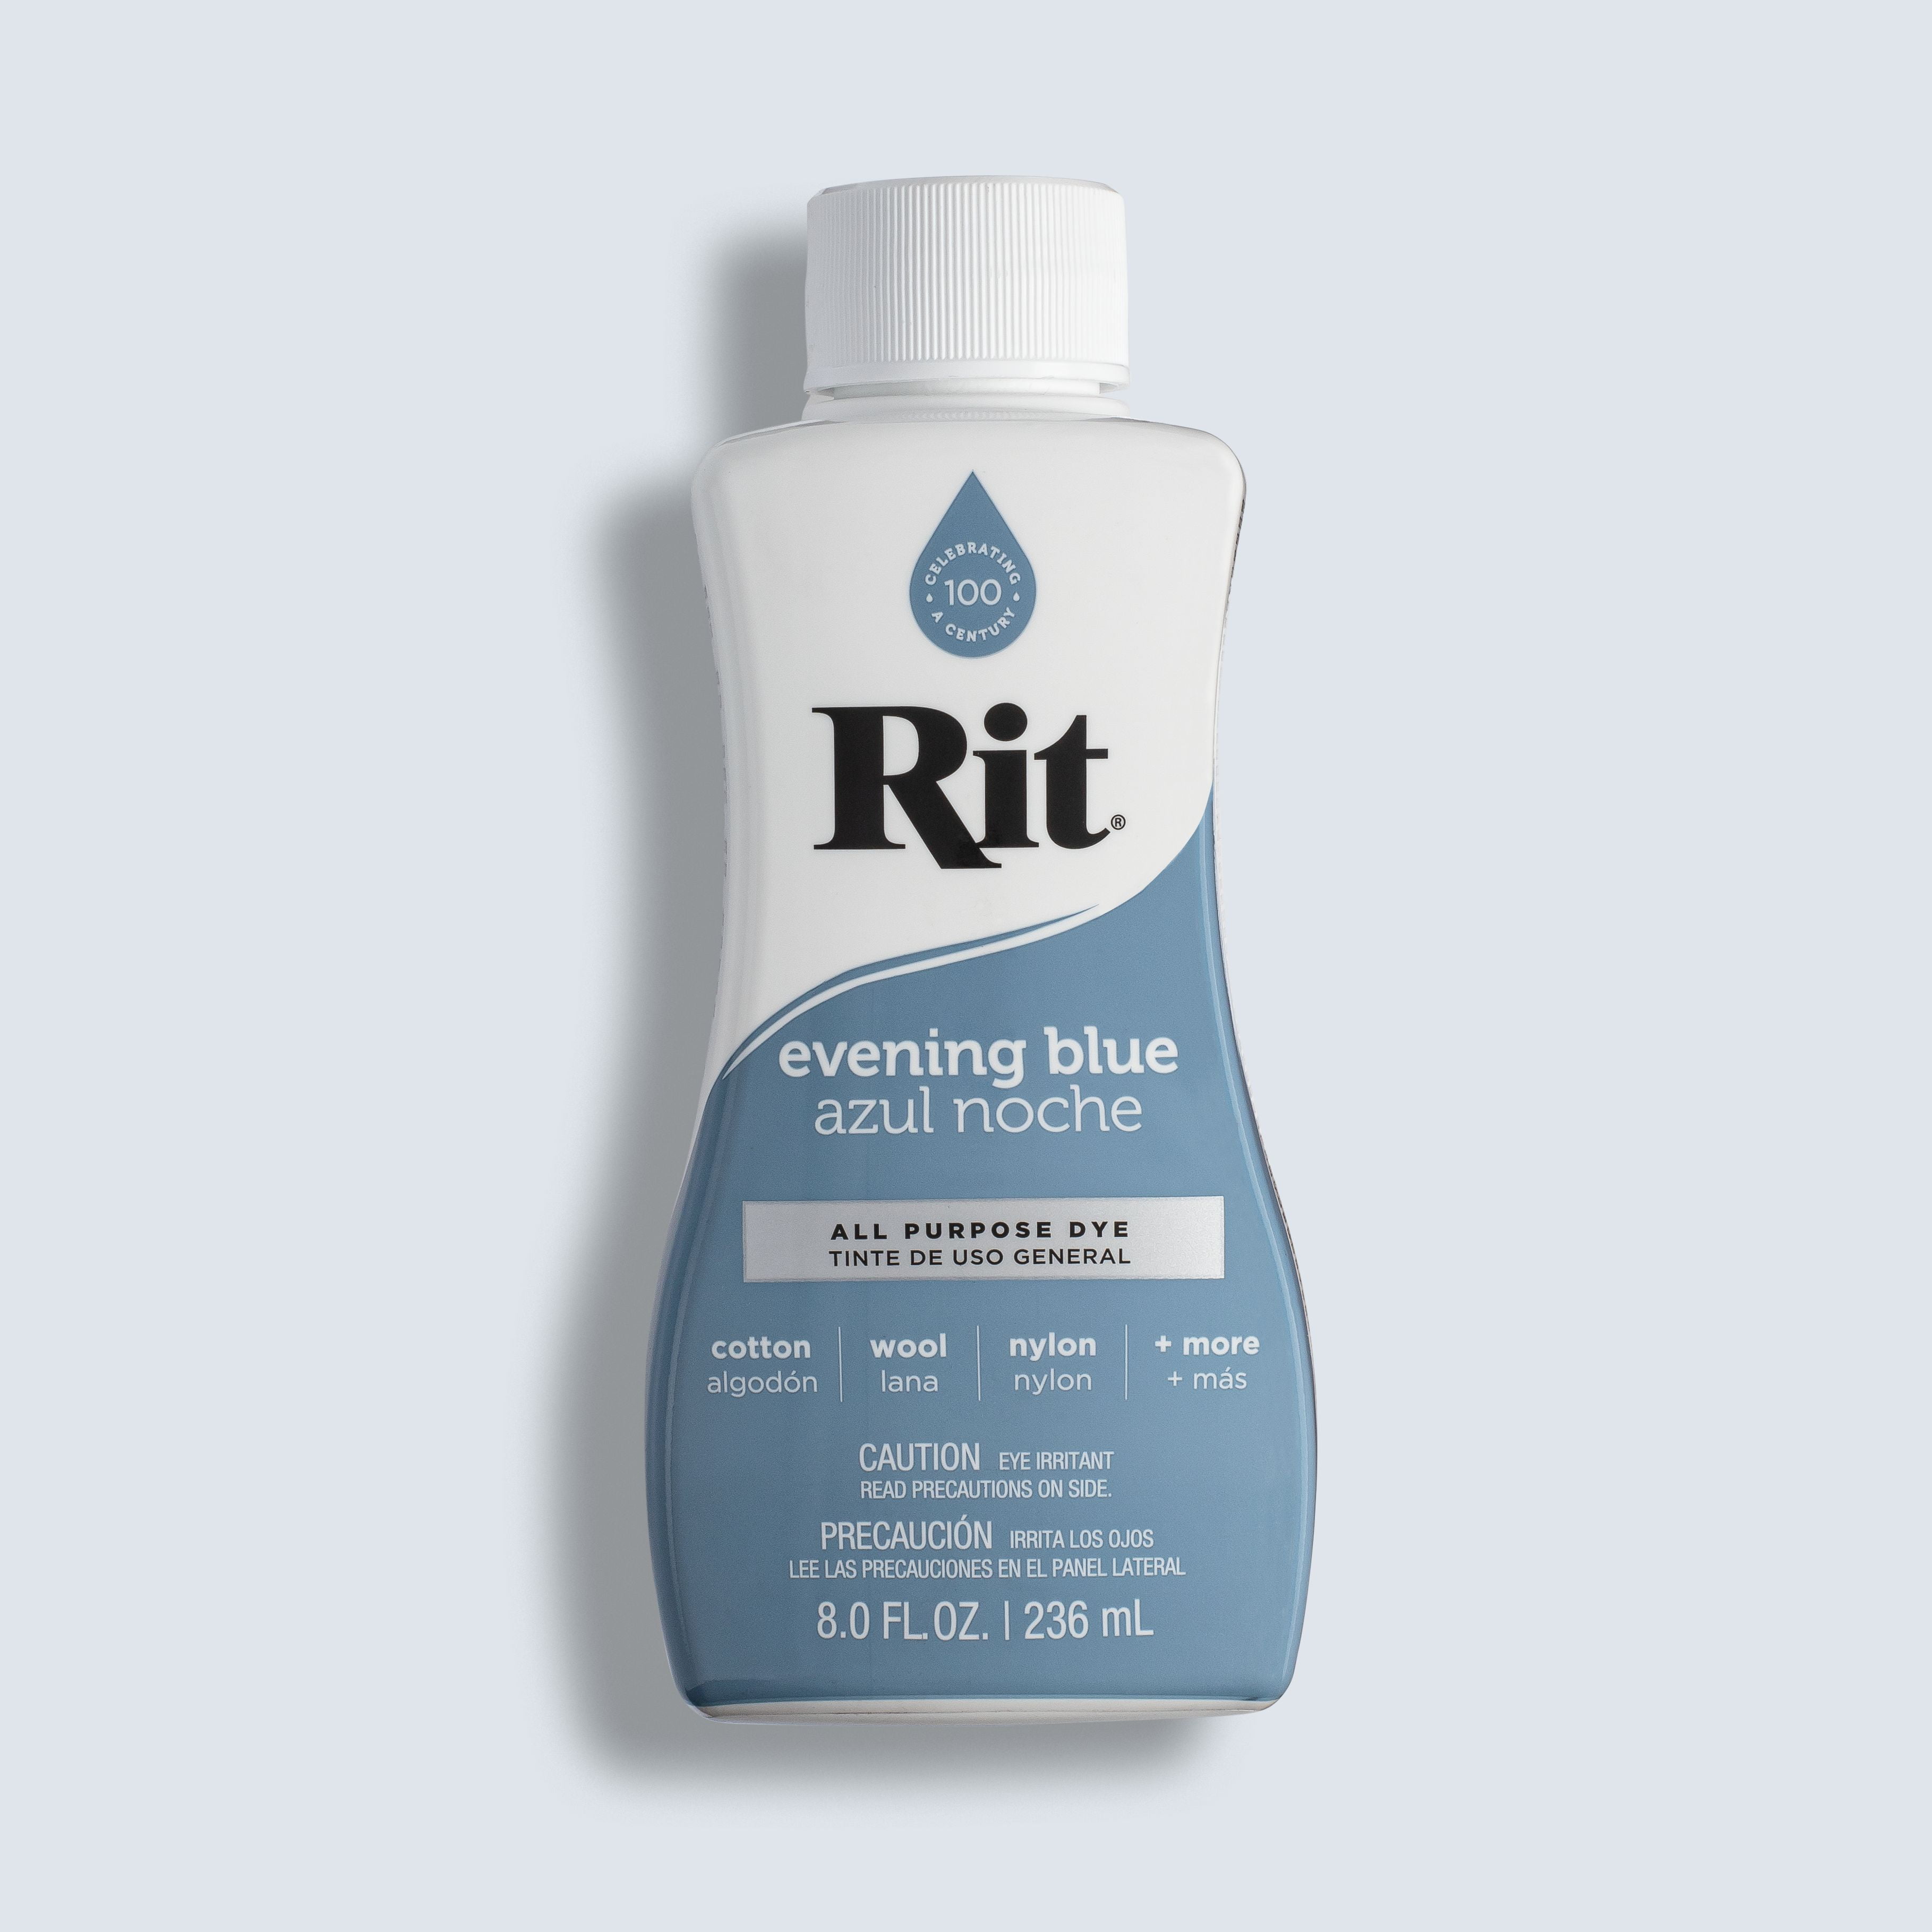  Rit Dye Powder Color & Rust Remover Great for Crafting DIY  Works on Most Fabric Cotton Nylon, Chlorine Free